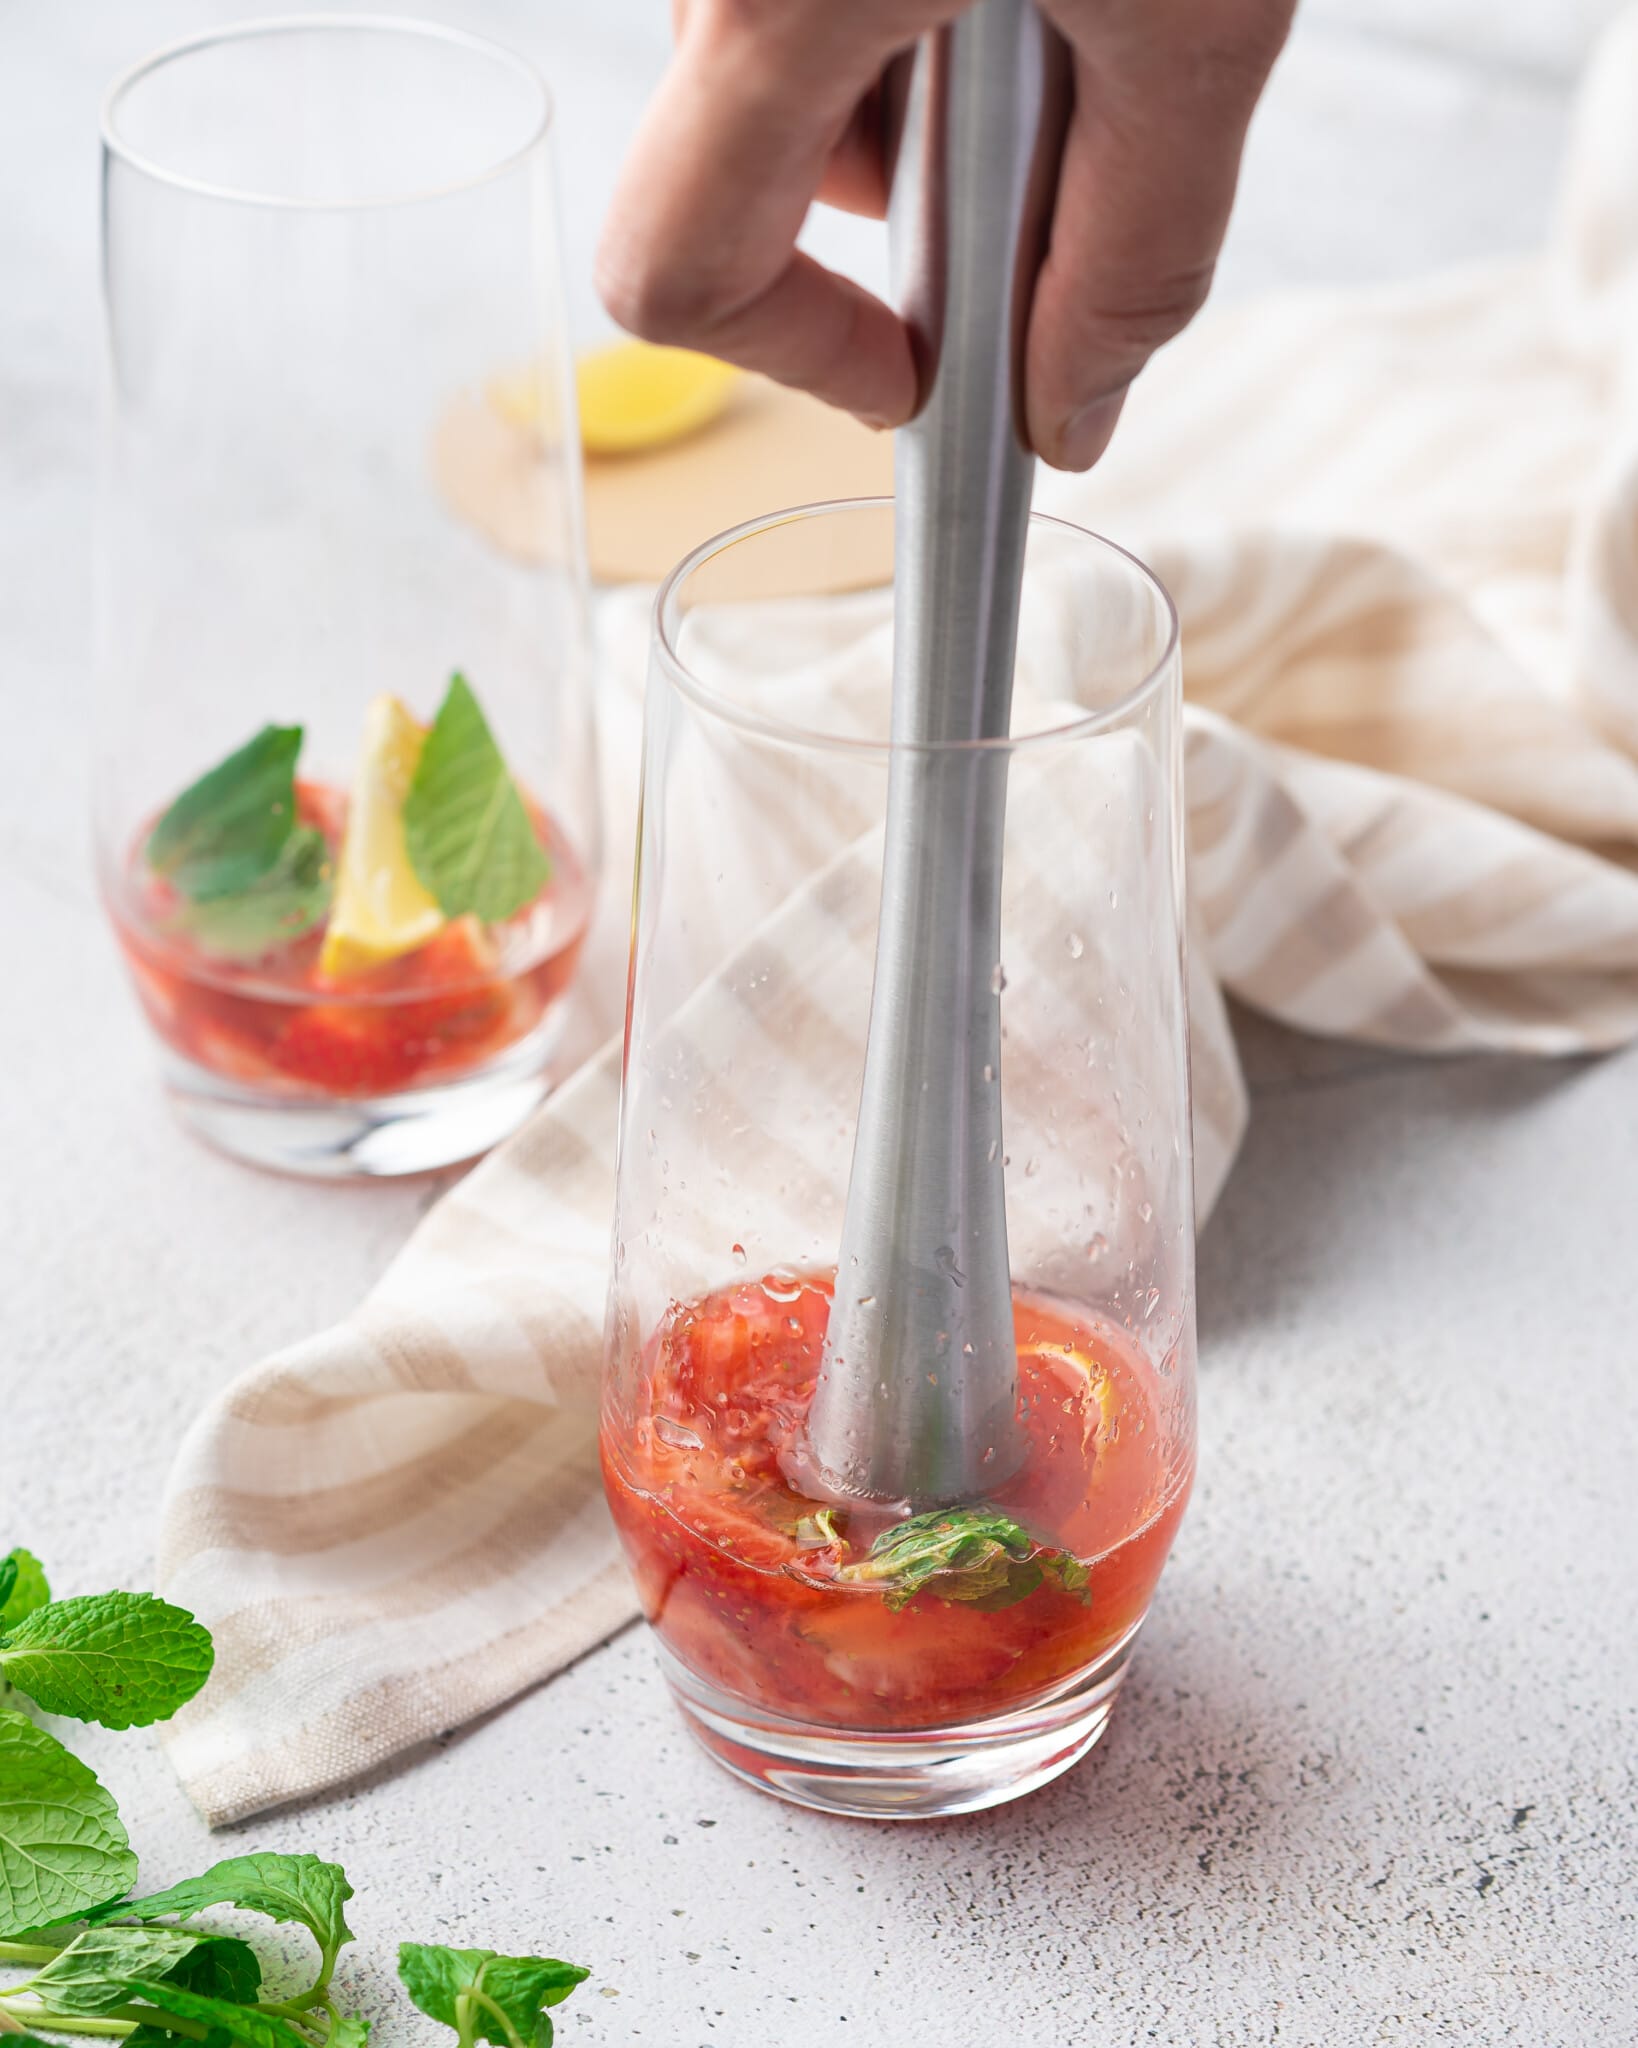 Metal muddler in a glass with strawberry mixture